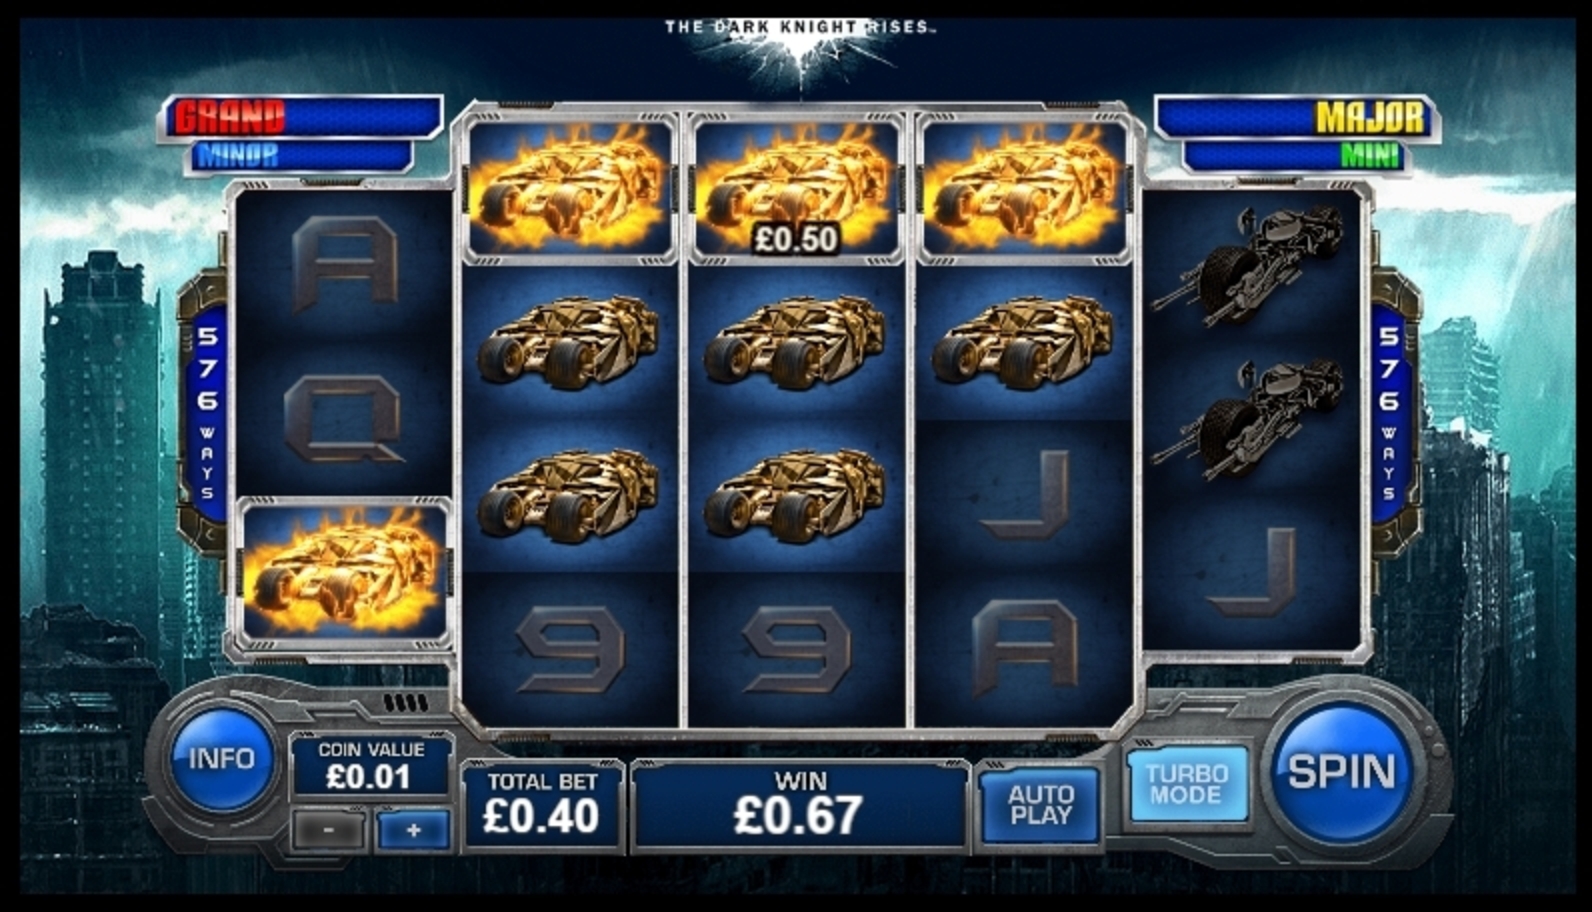 Win Money in The Dark Knight Rises Free Slot Game by Microgaming